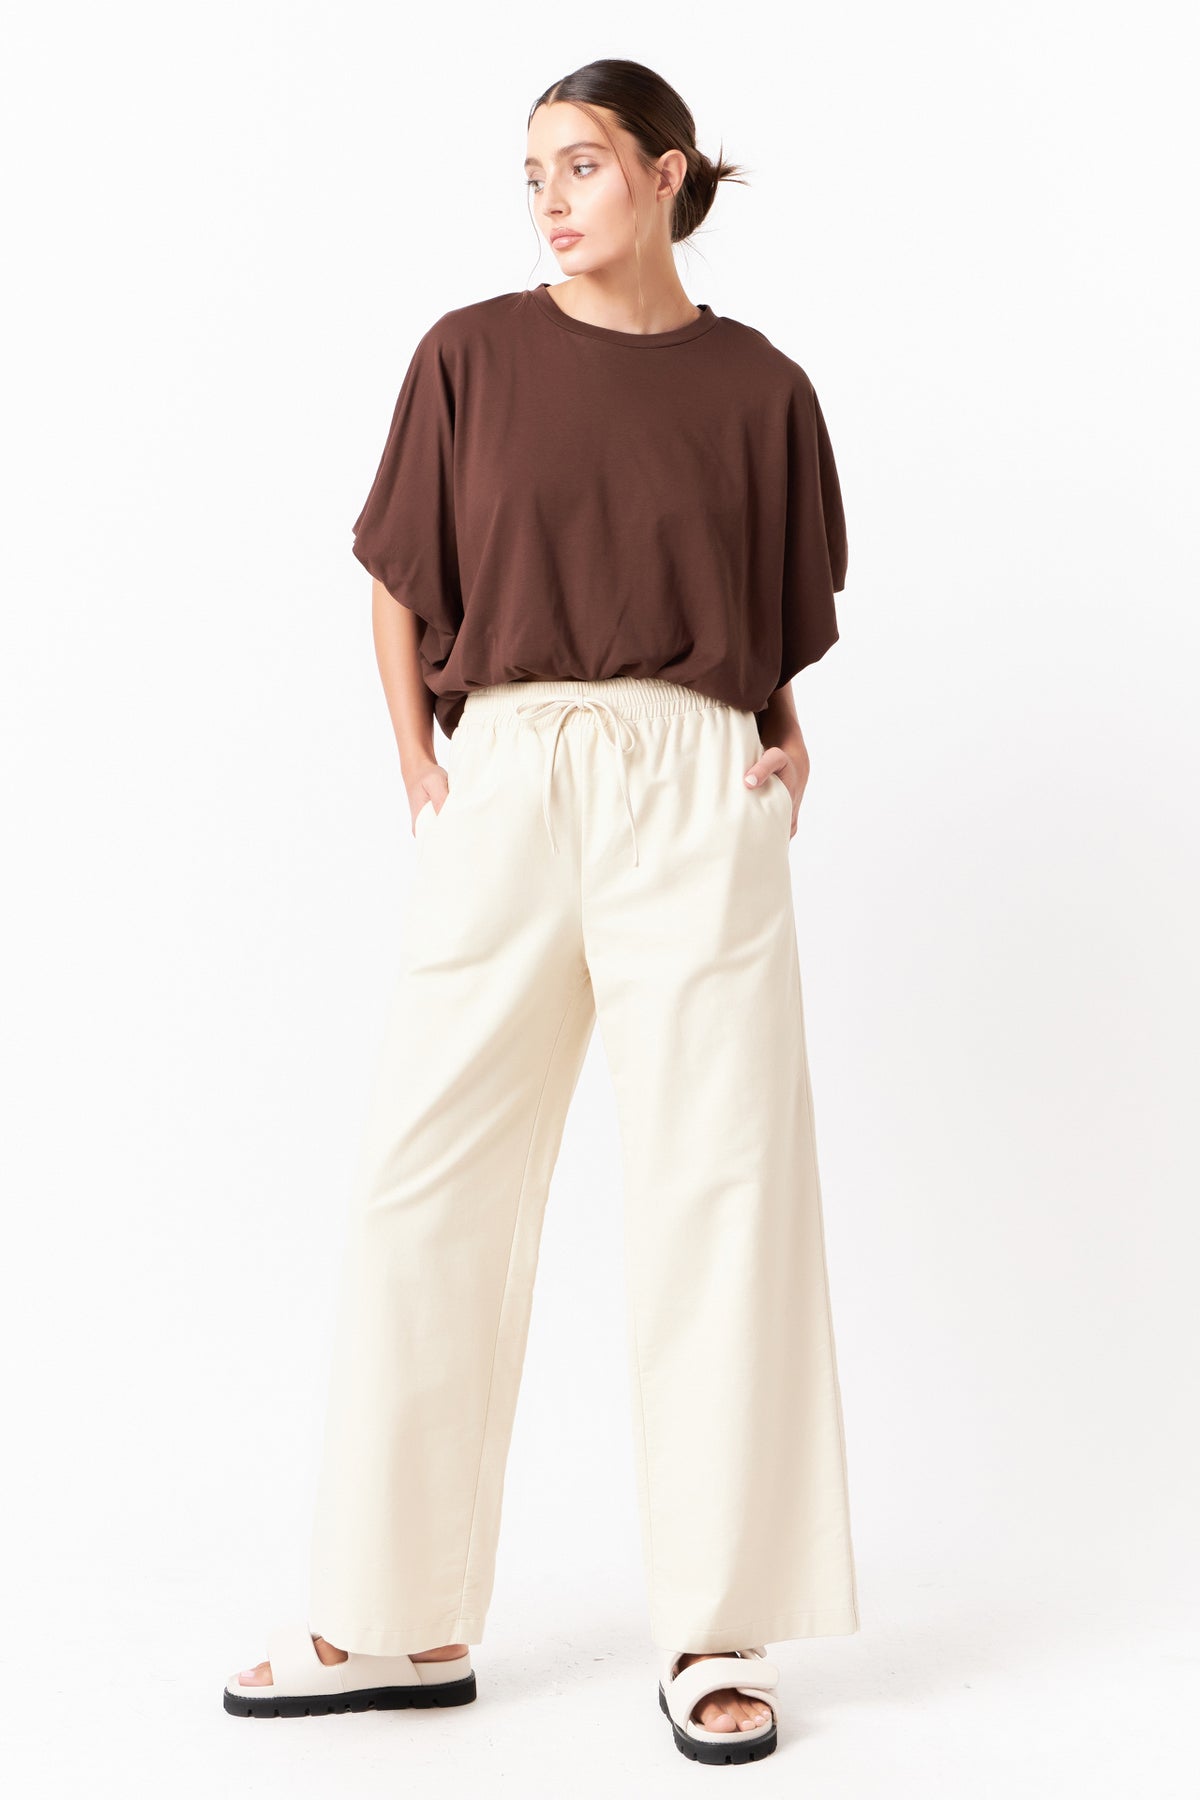 GREY LAB - Wide Leg Pants - PANTS available at Objectrare